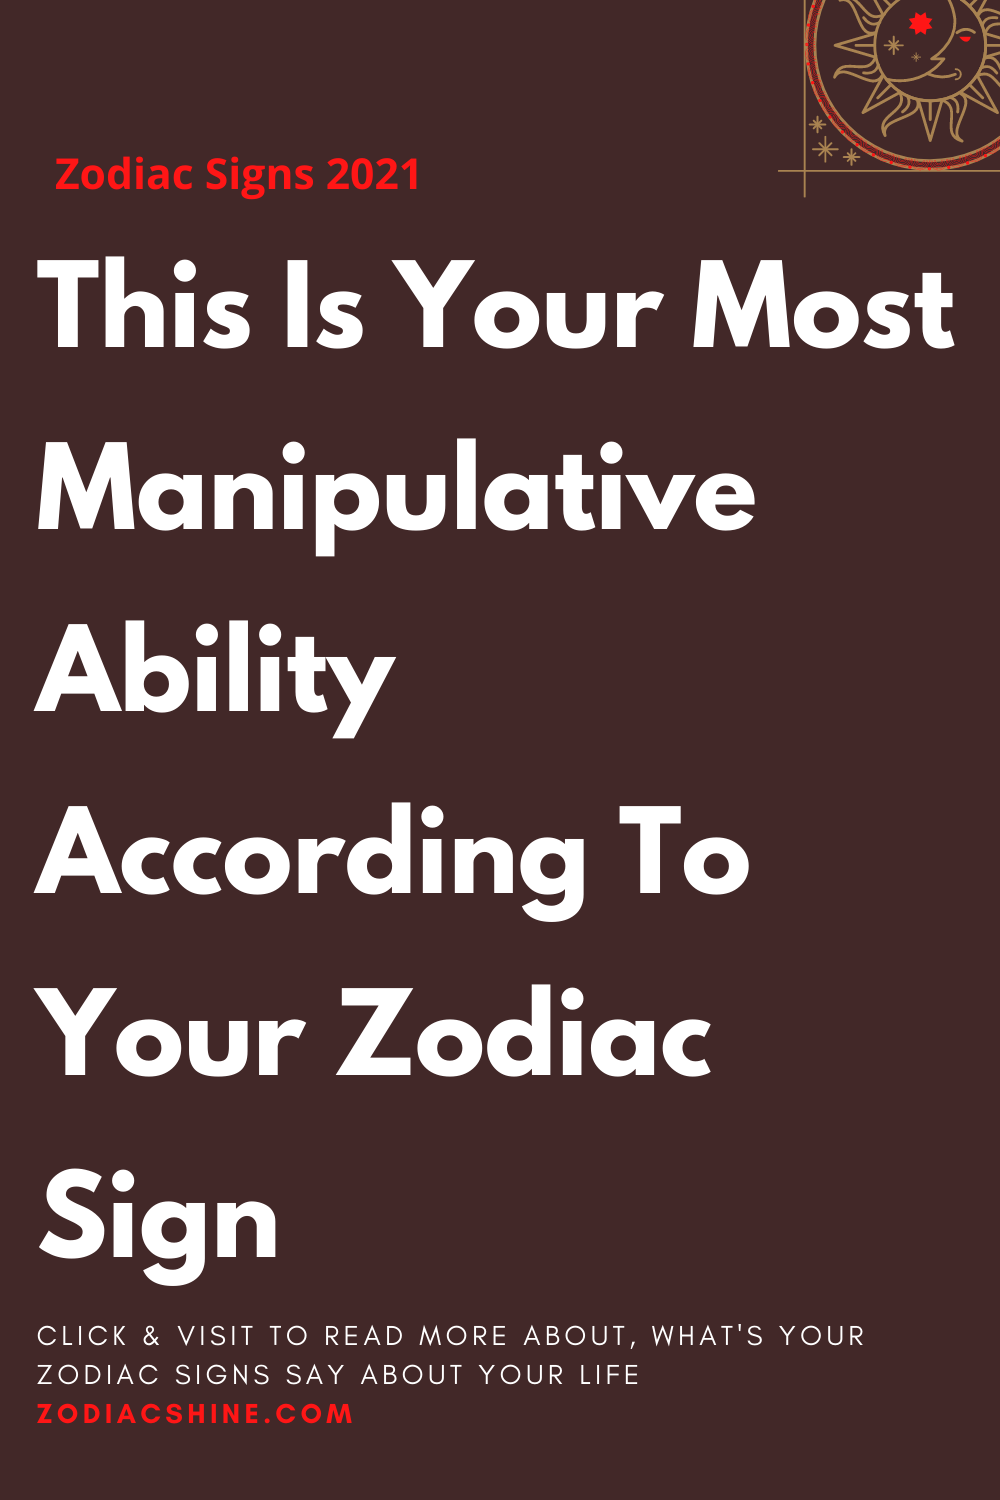 This is your most manipulative ability according to your zodiac sign